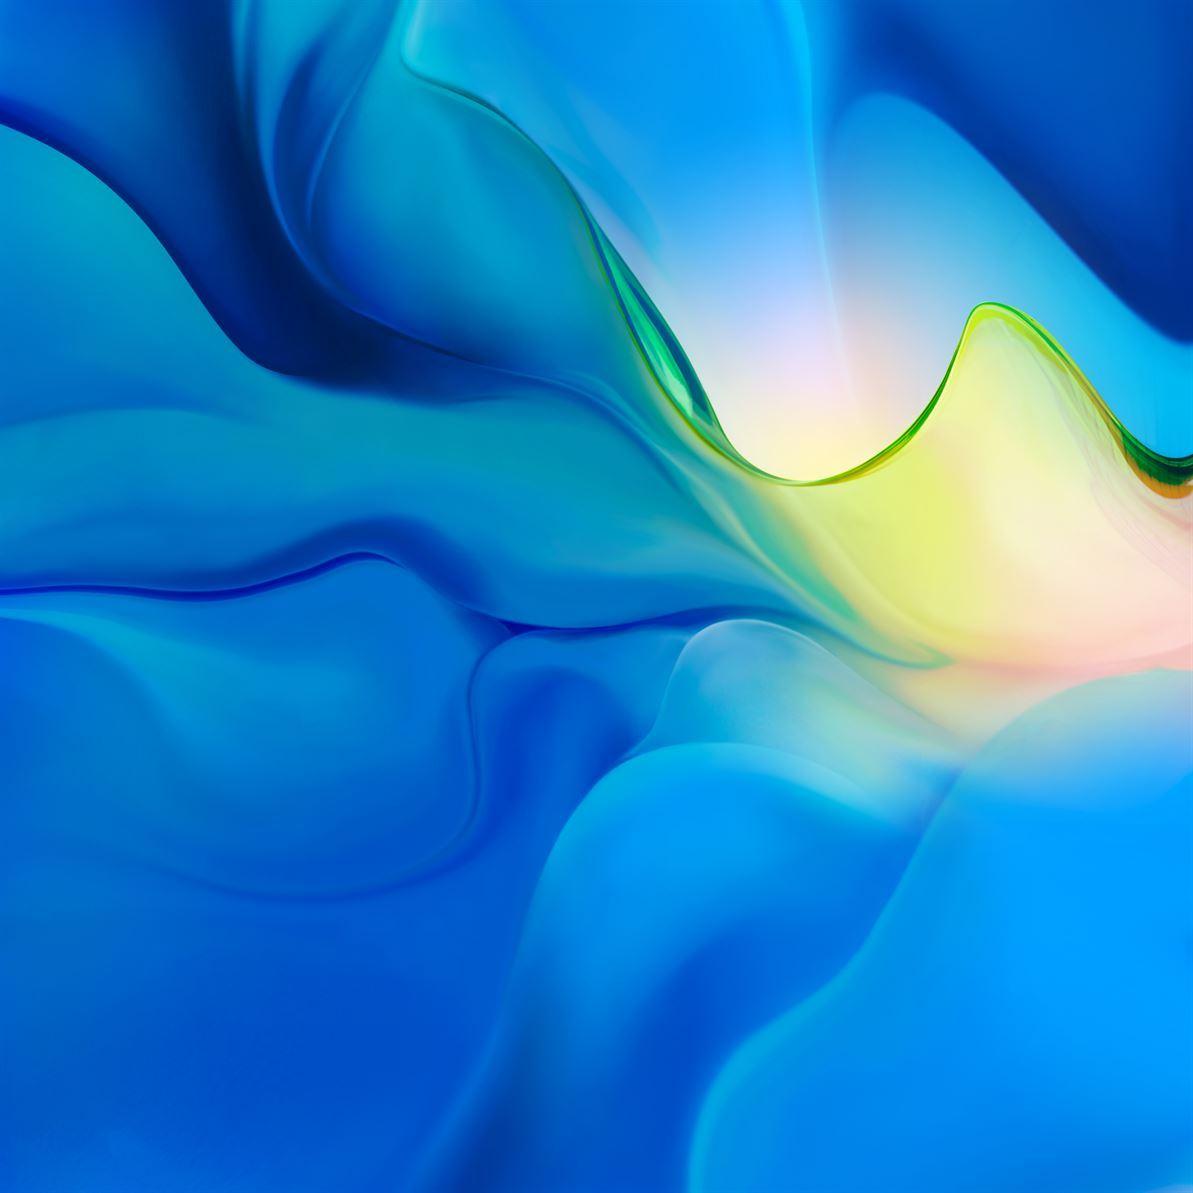 Download the Huawei P30's wallpapers and EMUI 9 themes